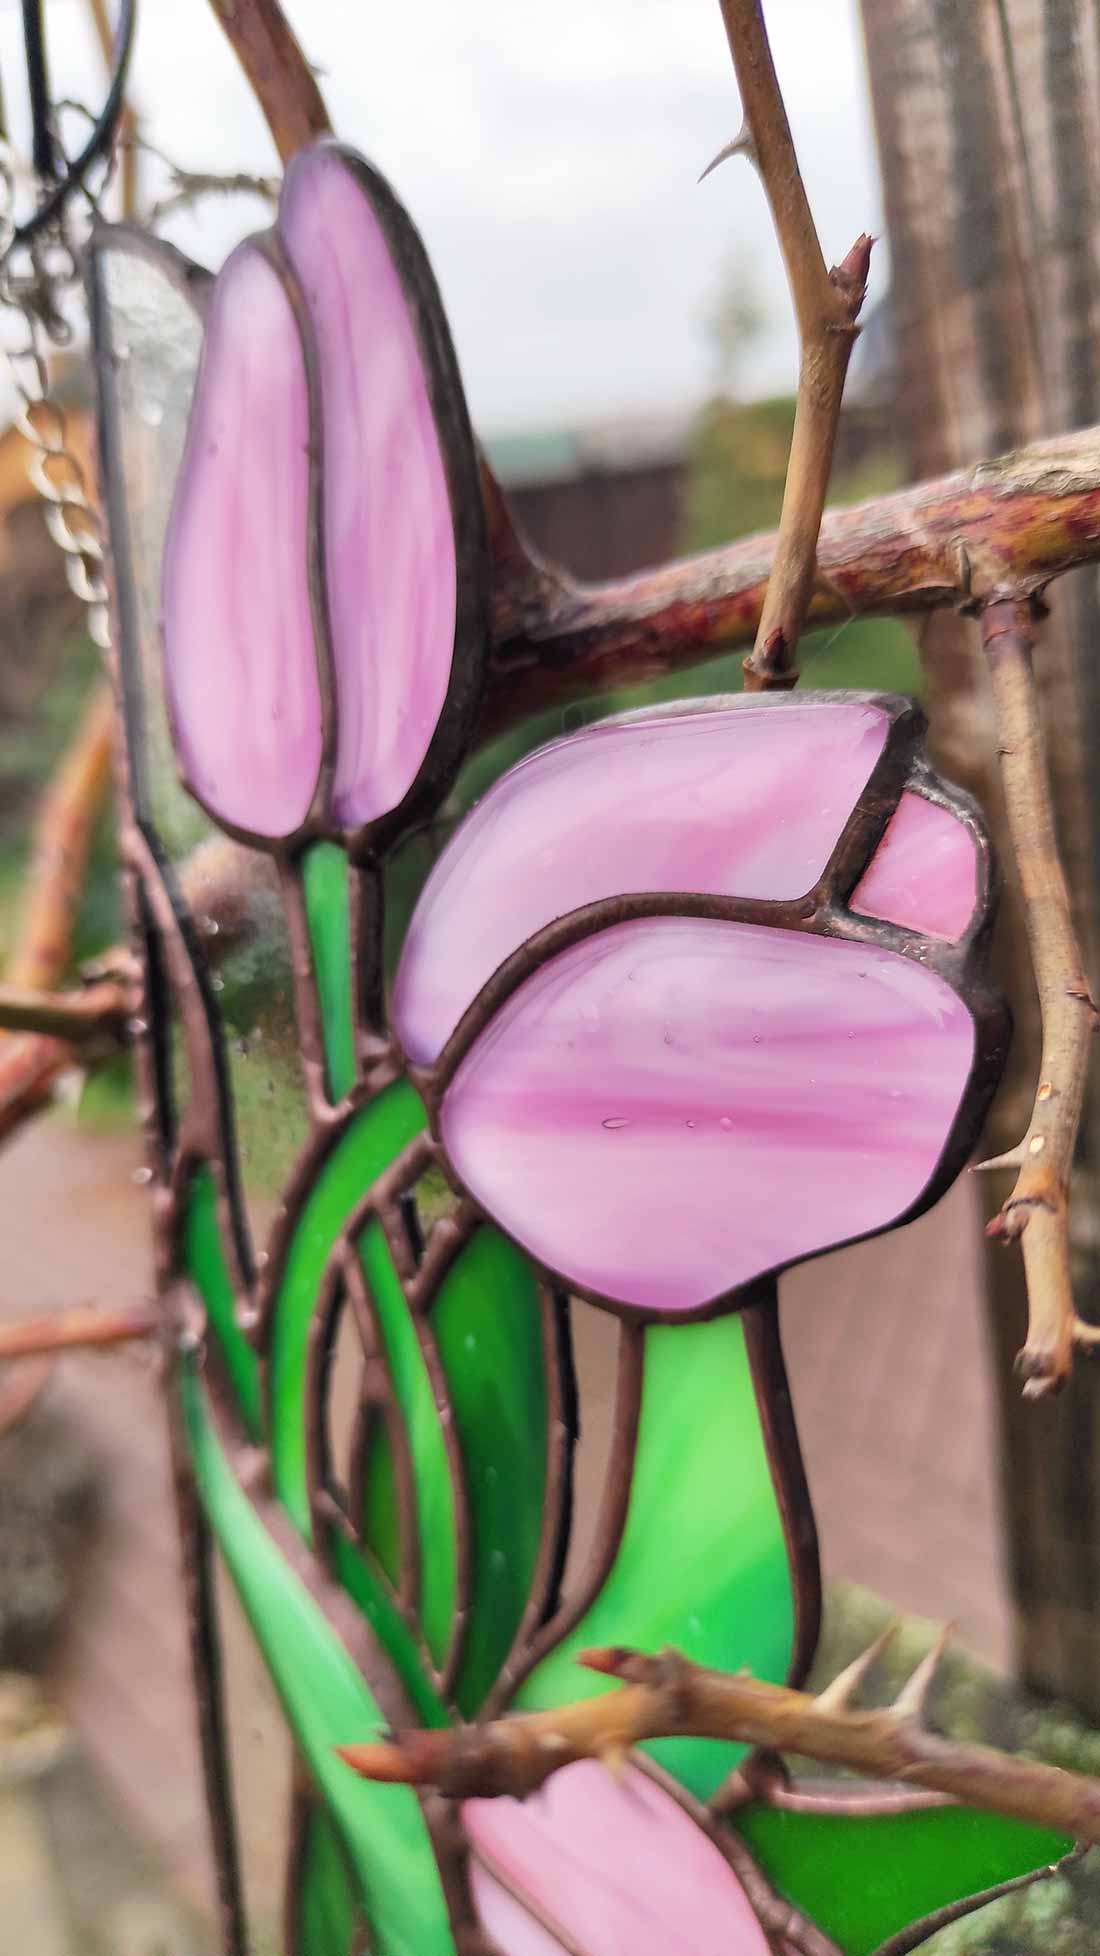 stained glass flowers